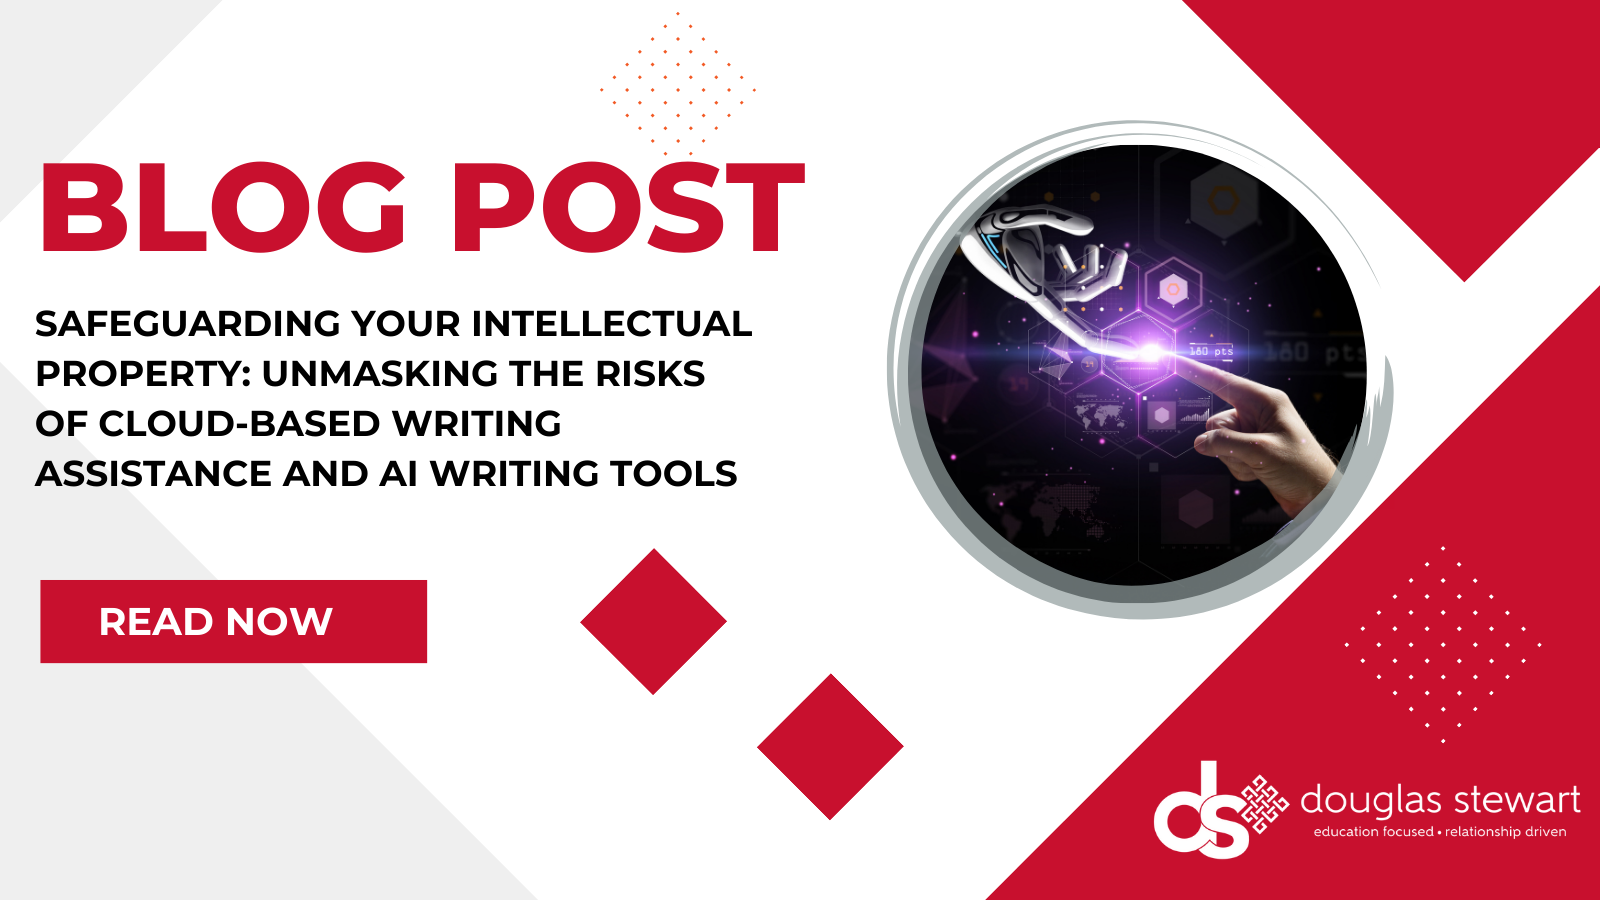 Safeguarding Your Intellectual Property: Unmasking the Risks of Cloud-Based Writing Assistance and AI Writing Tools